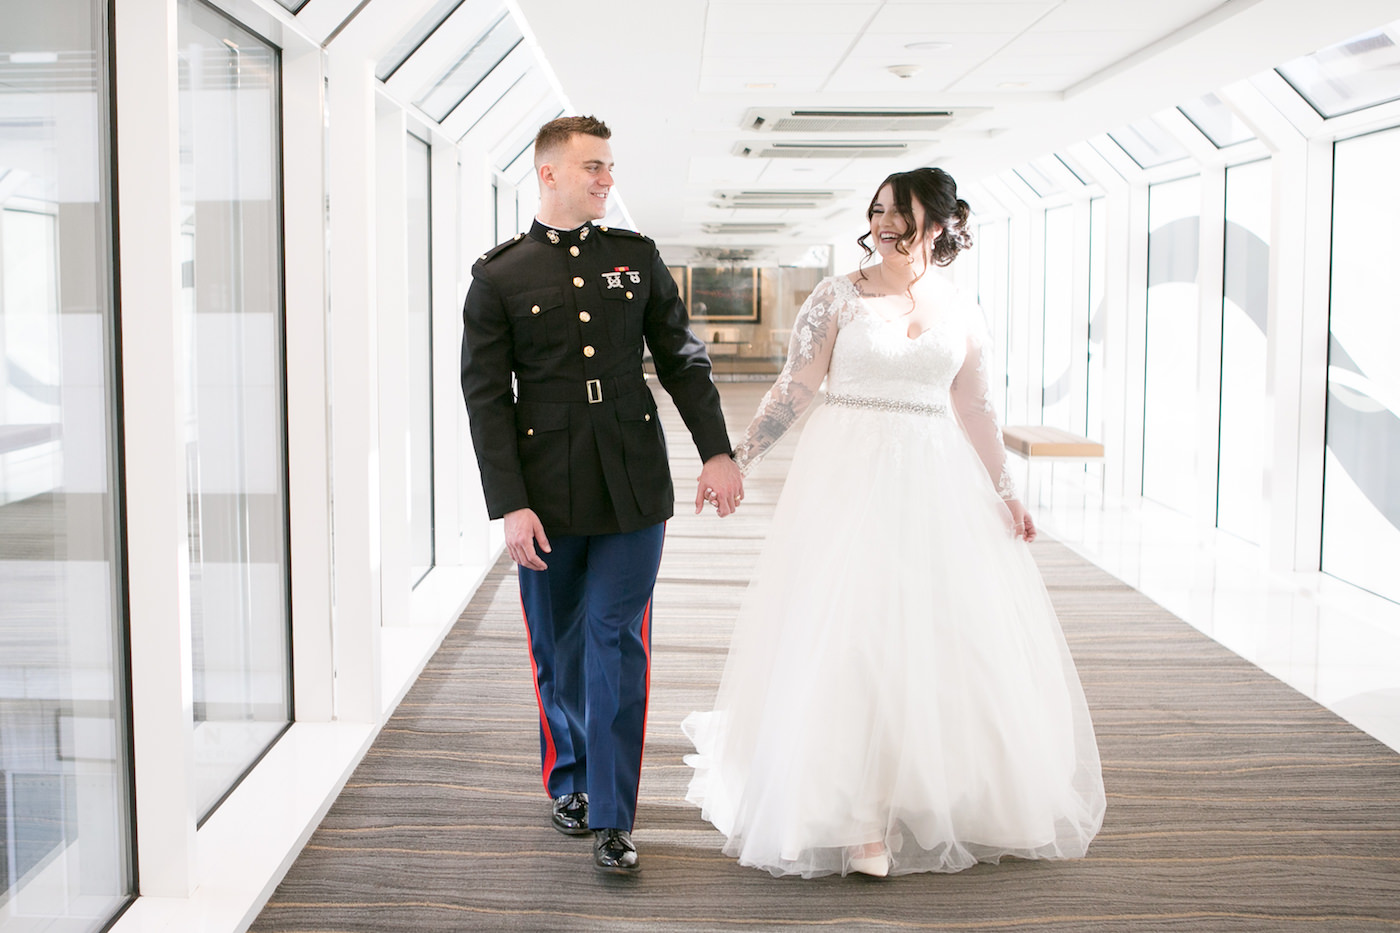 Whimsical Bride and Military Groom in Dress Blues Uniform Wedding Portrait | Wedding Photographer Carrie Wildes Photography